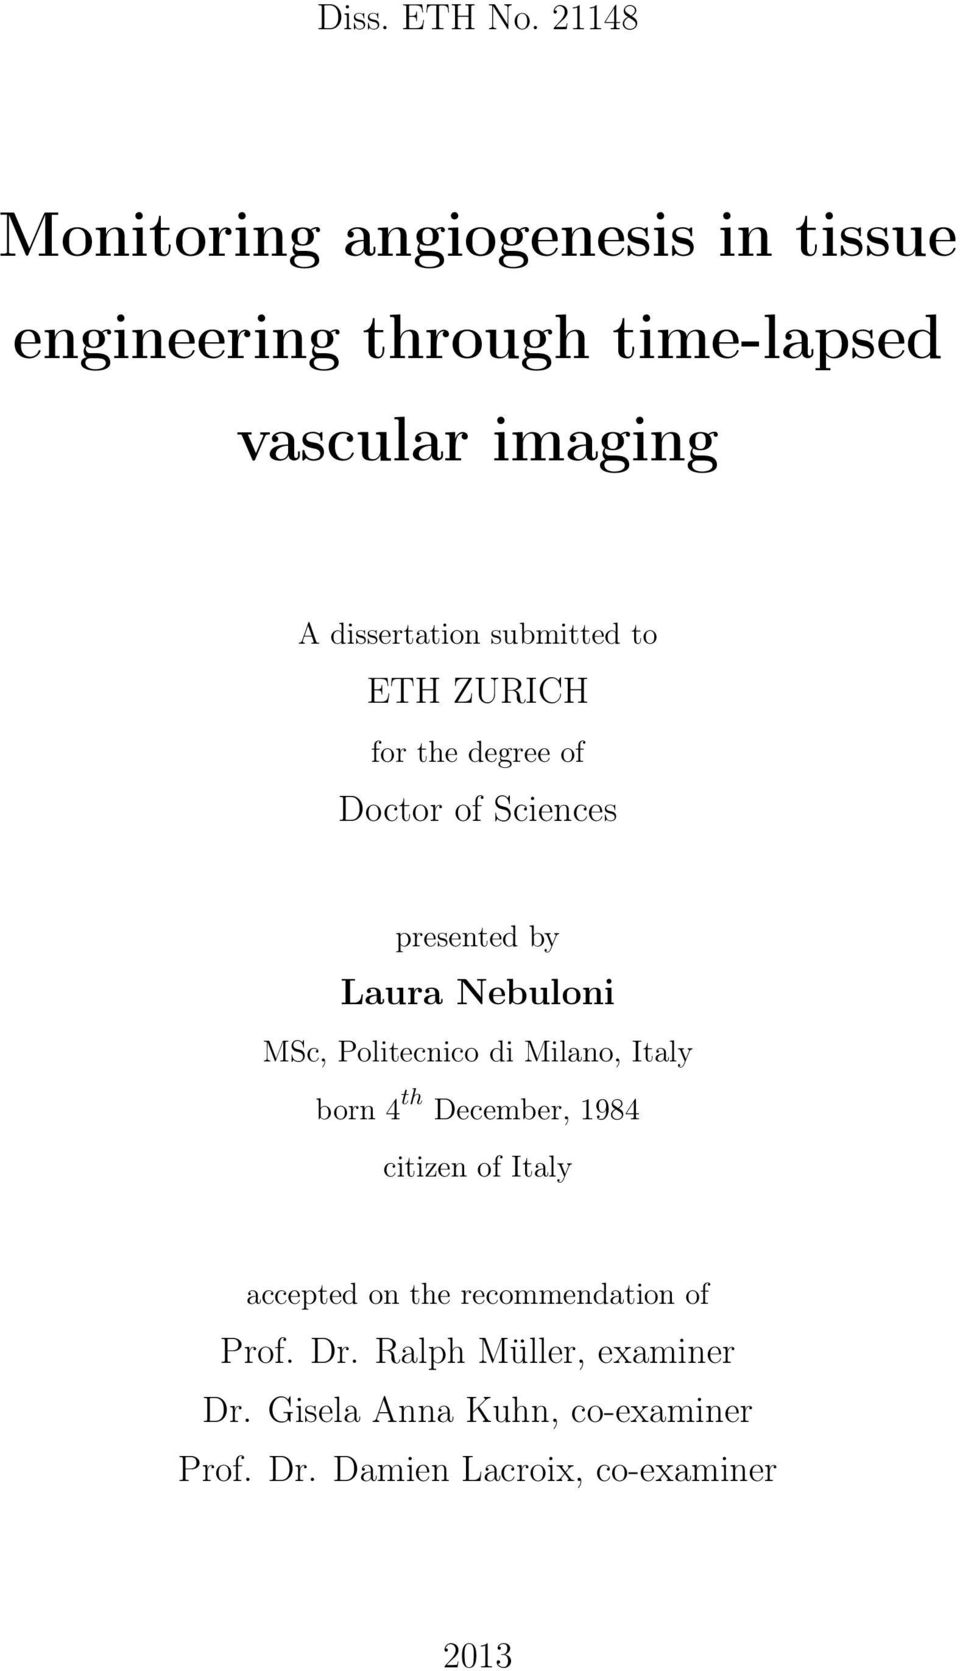 submitted to ETH ZURICH for the degree of Doctor of Sciences presented by Laura Nebuloni MSc, Politecnico